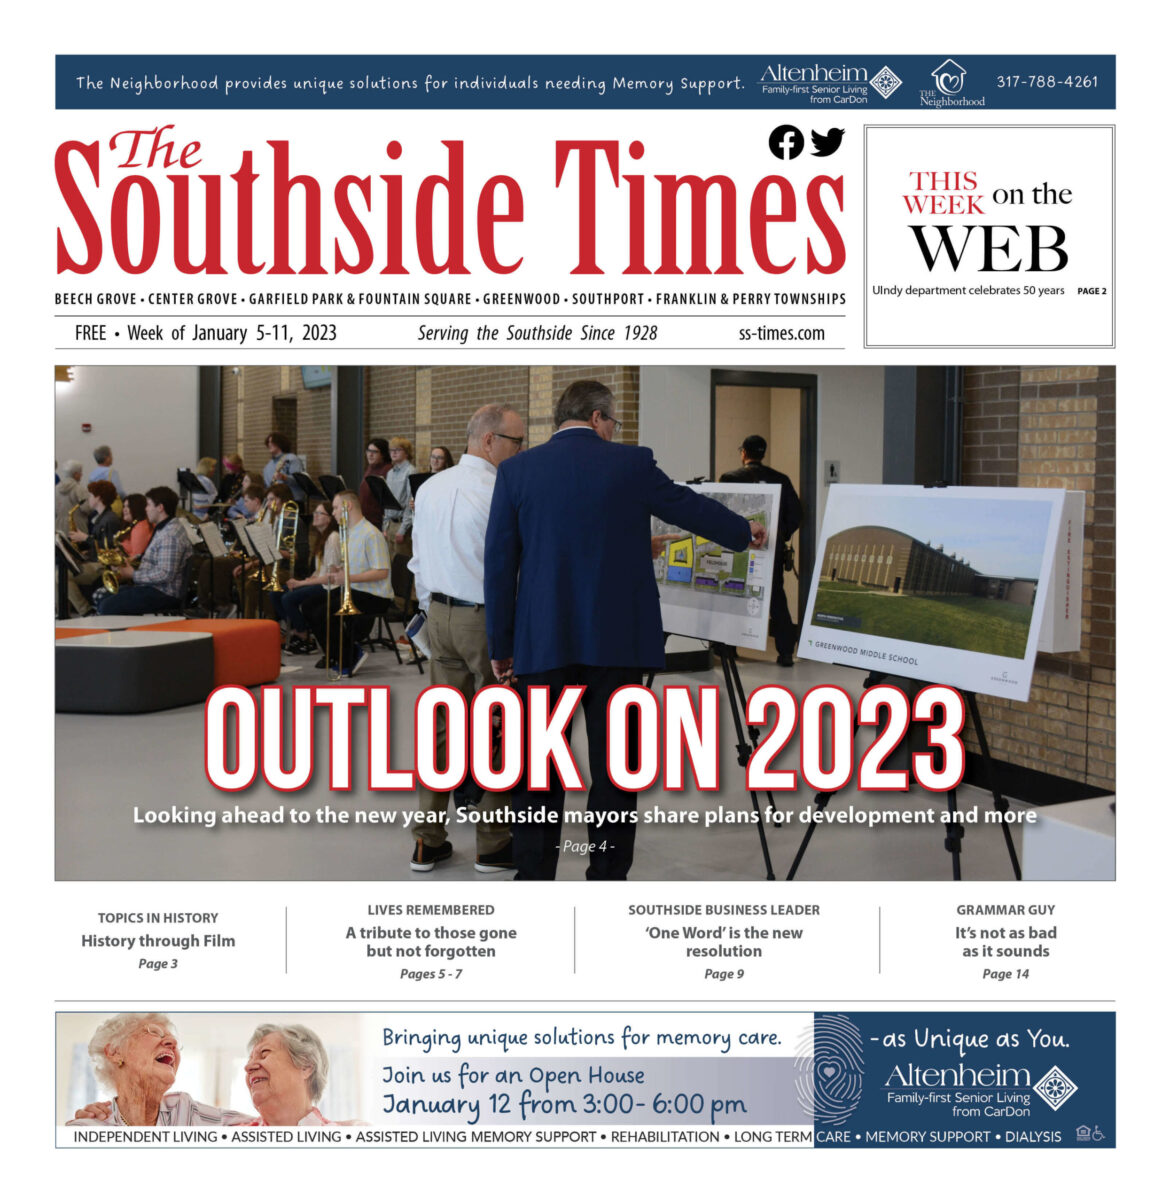 The Southside Times – Jan. 5-11, 2022